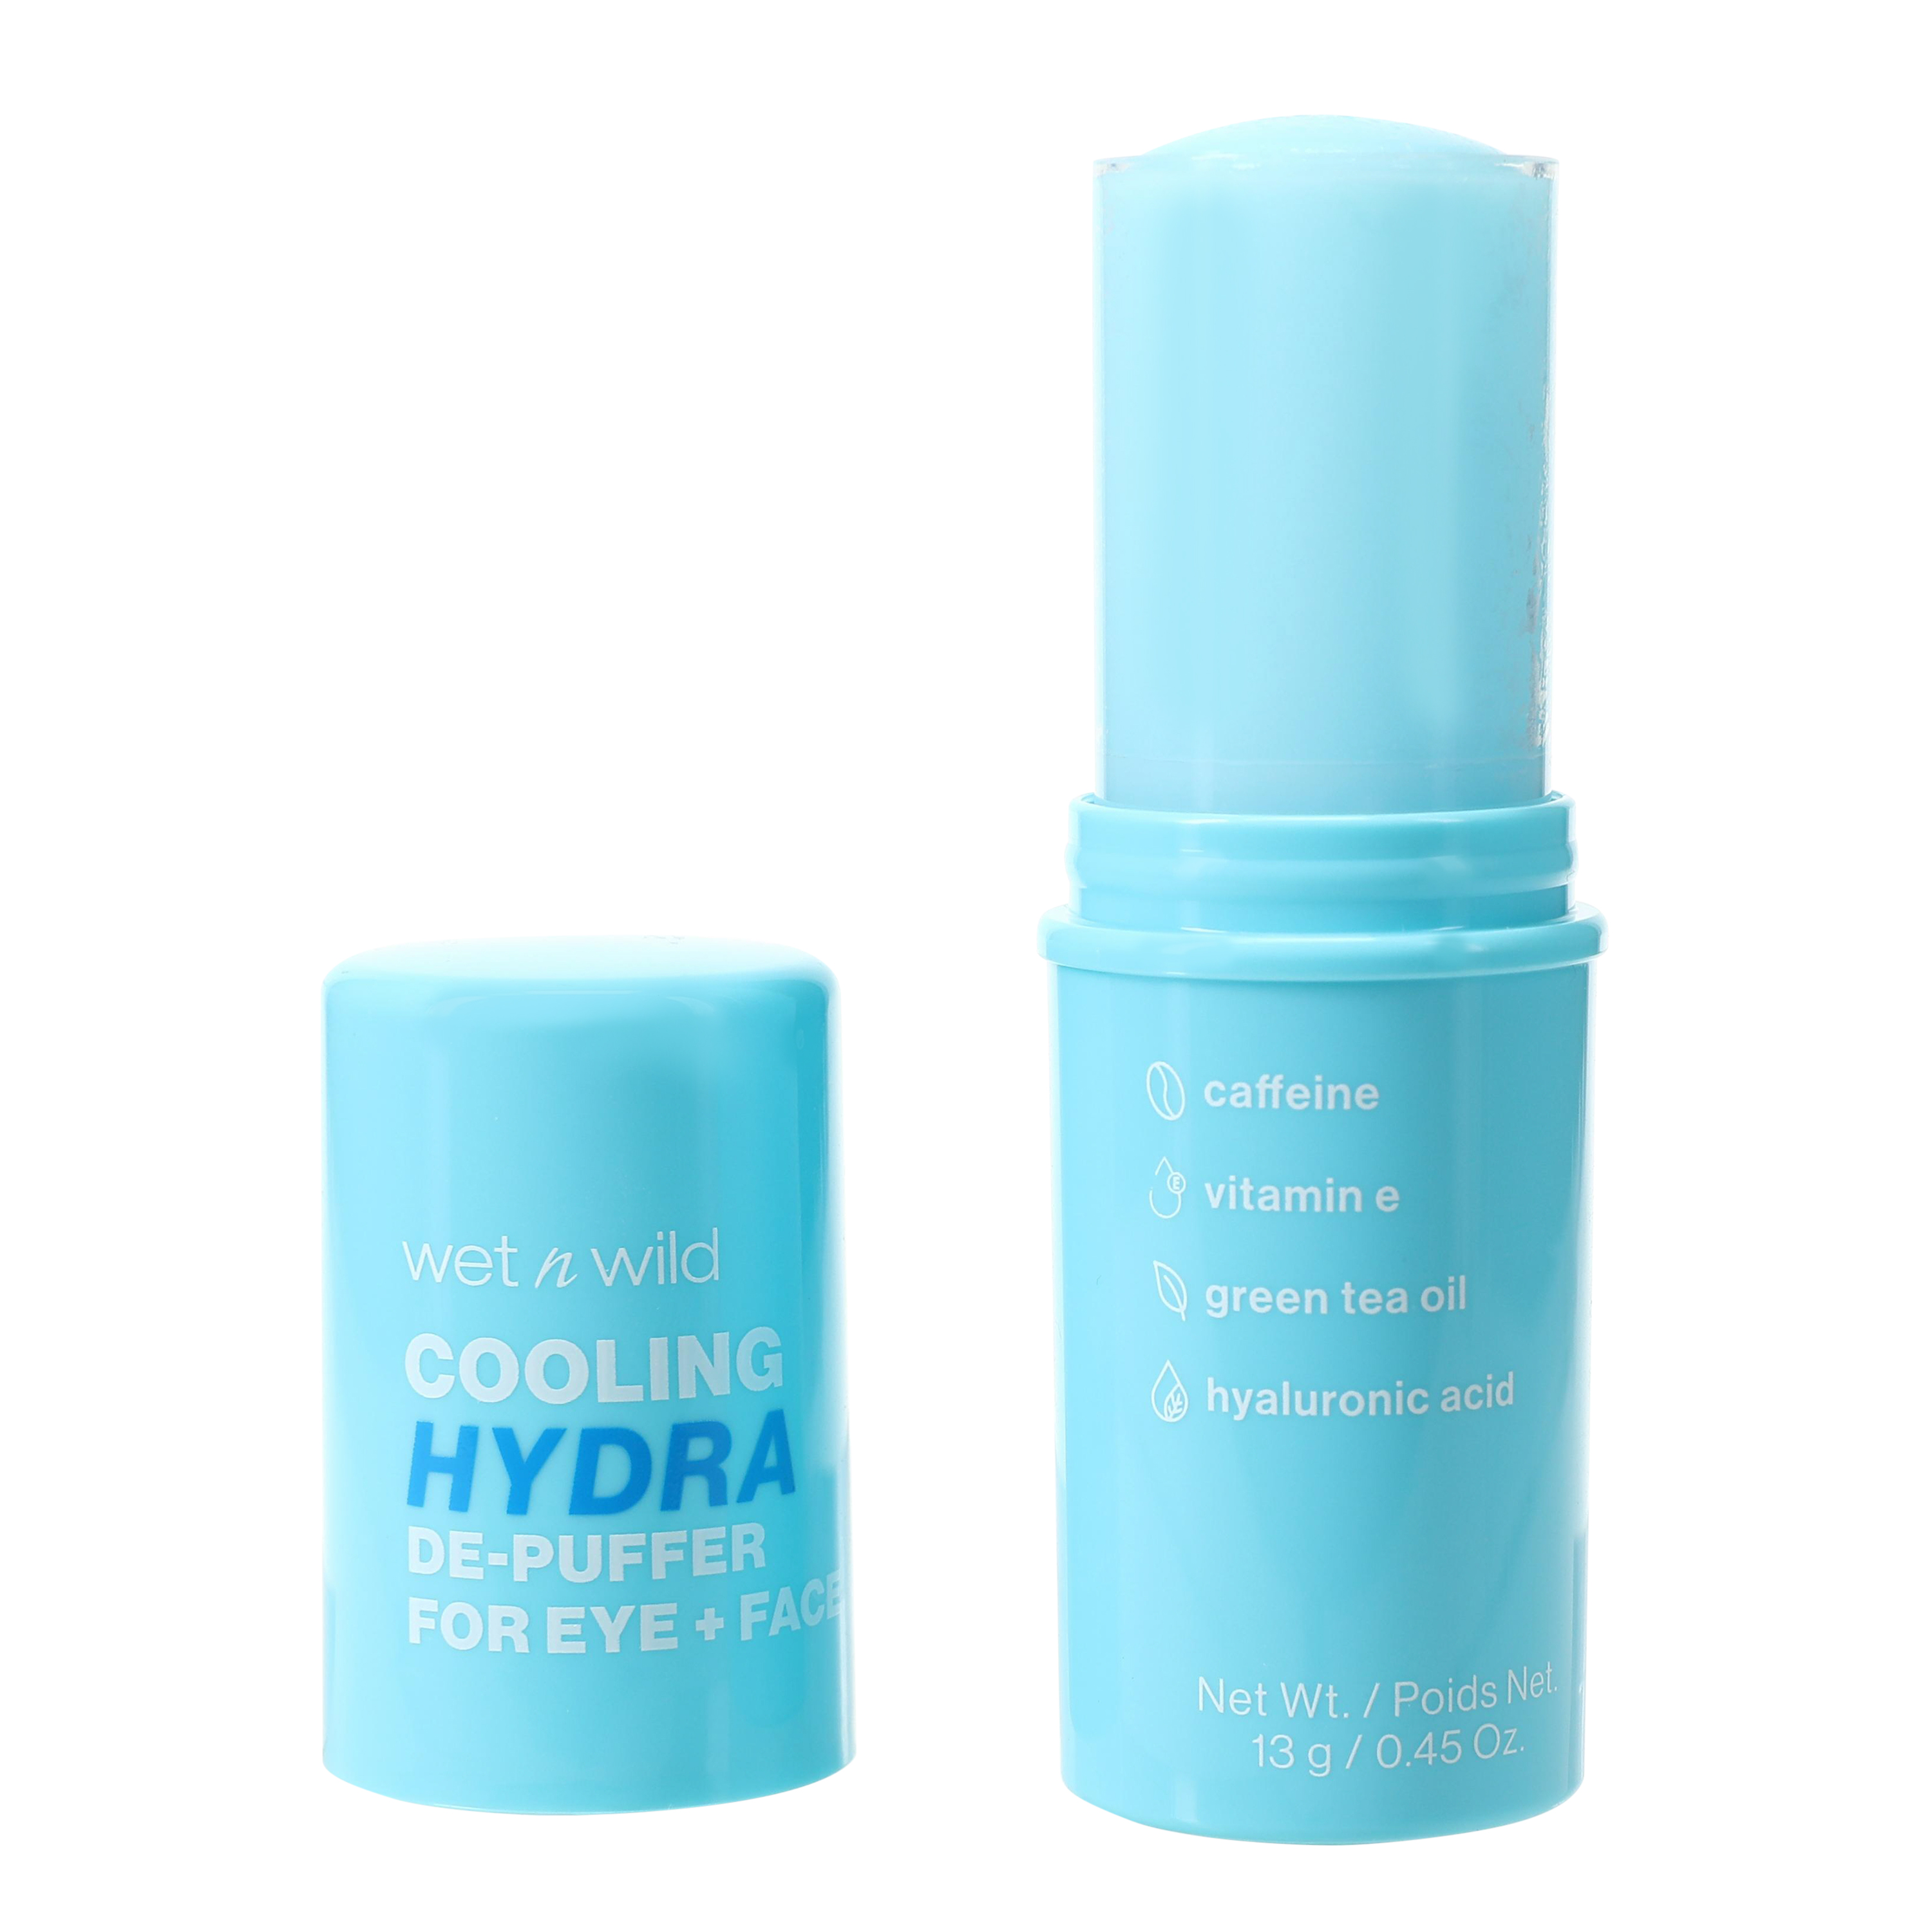 Wet N Wild® Cooling Hydra De-Puffer For Eye And Face